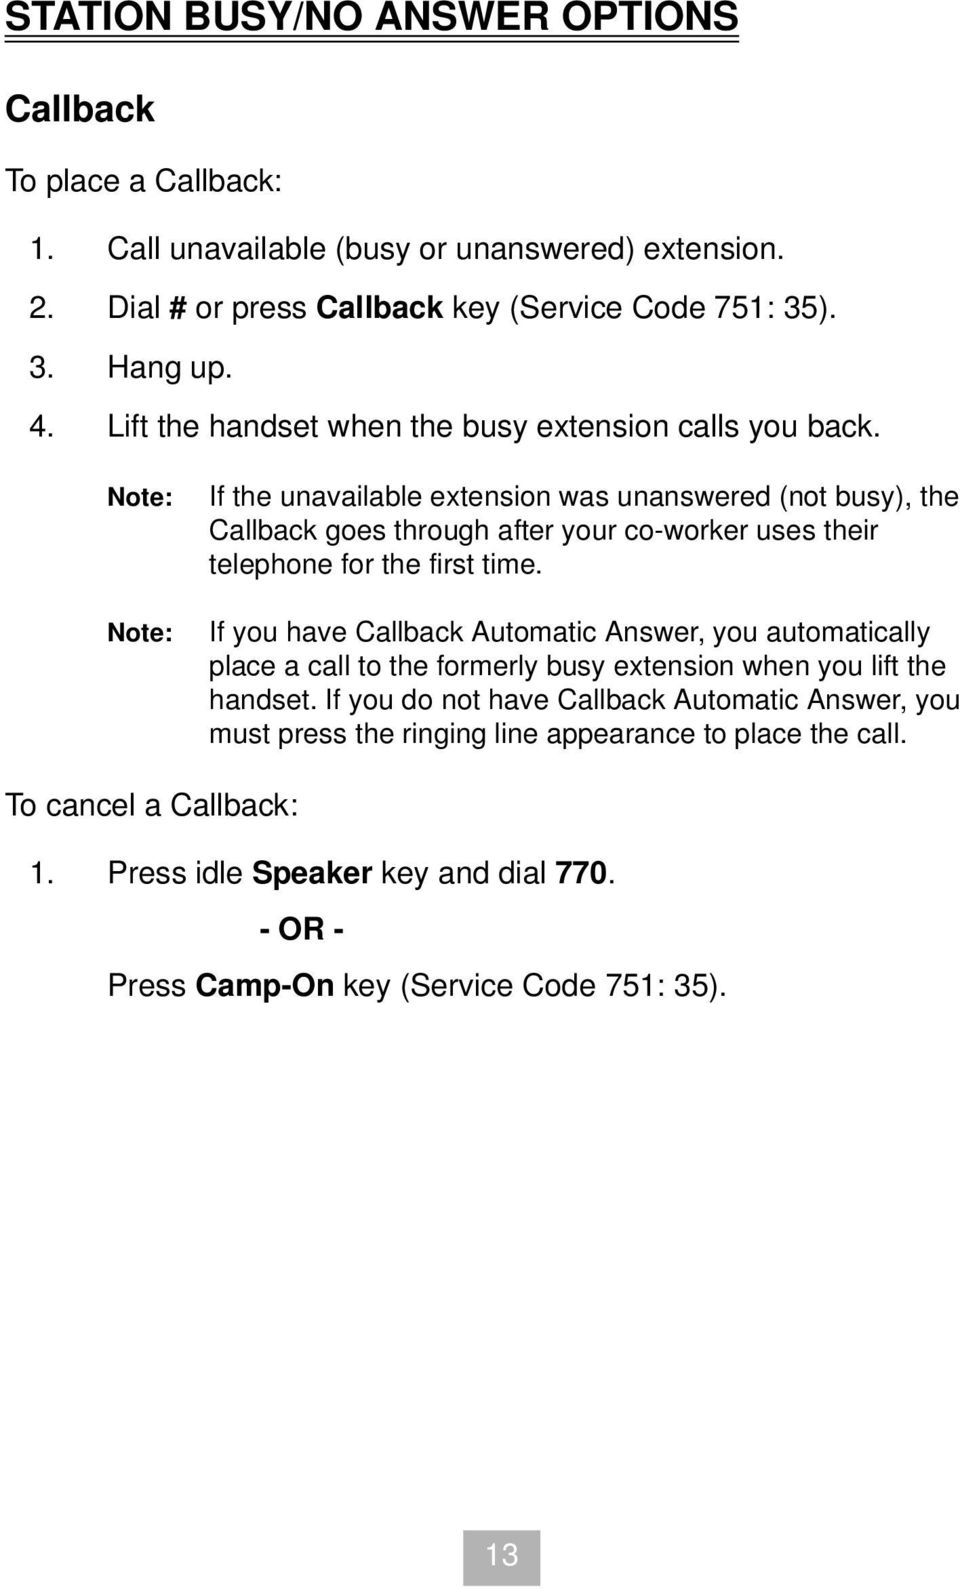 If the unavailable extension was unanswered (not busy), the Callback goes through after your co-worker uses their telephone for the first time.